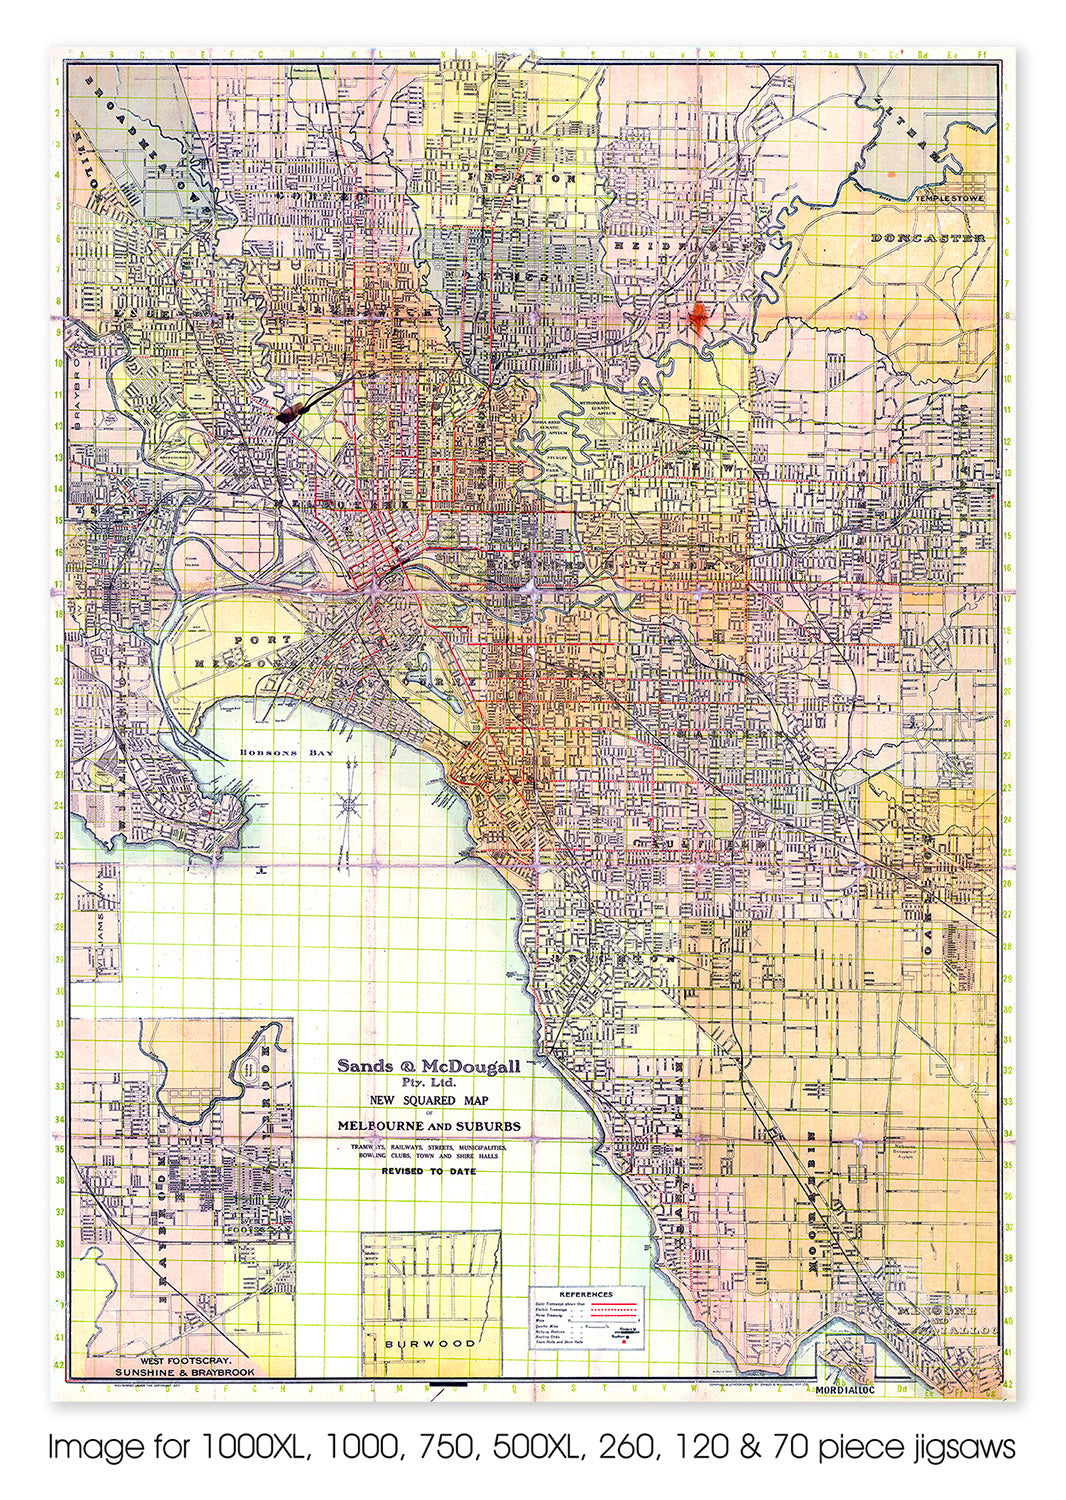 New Squared Map of Melbourne & Suburbs, circa 1920's